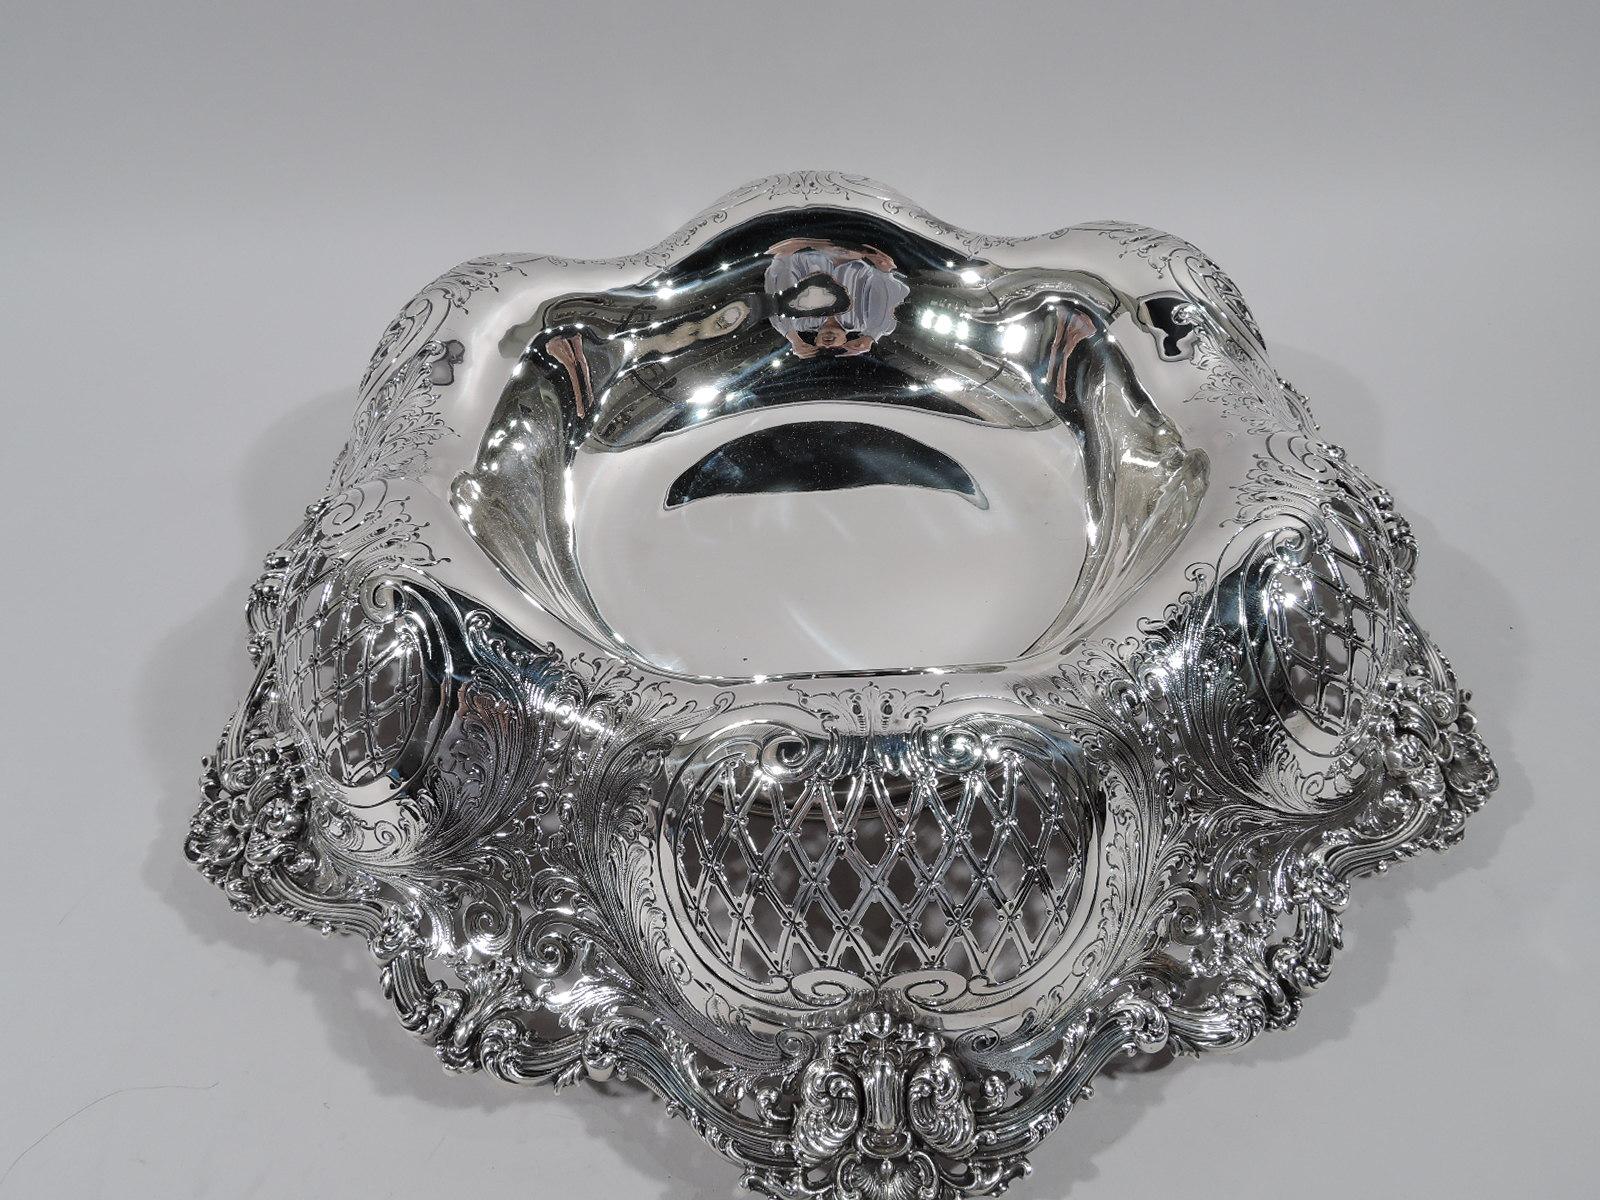 Gilded Age sterling silver centerpiece bowl. Made by Redlich in New York, ca 1900. Round solid well. Sides lobed and turned-down with pierced diaper in engraved leafy scrolled frames. Rim has reeded leaf-capped scrolls interspersed with leaves and